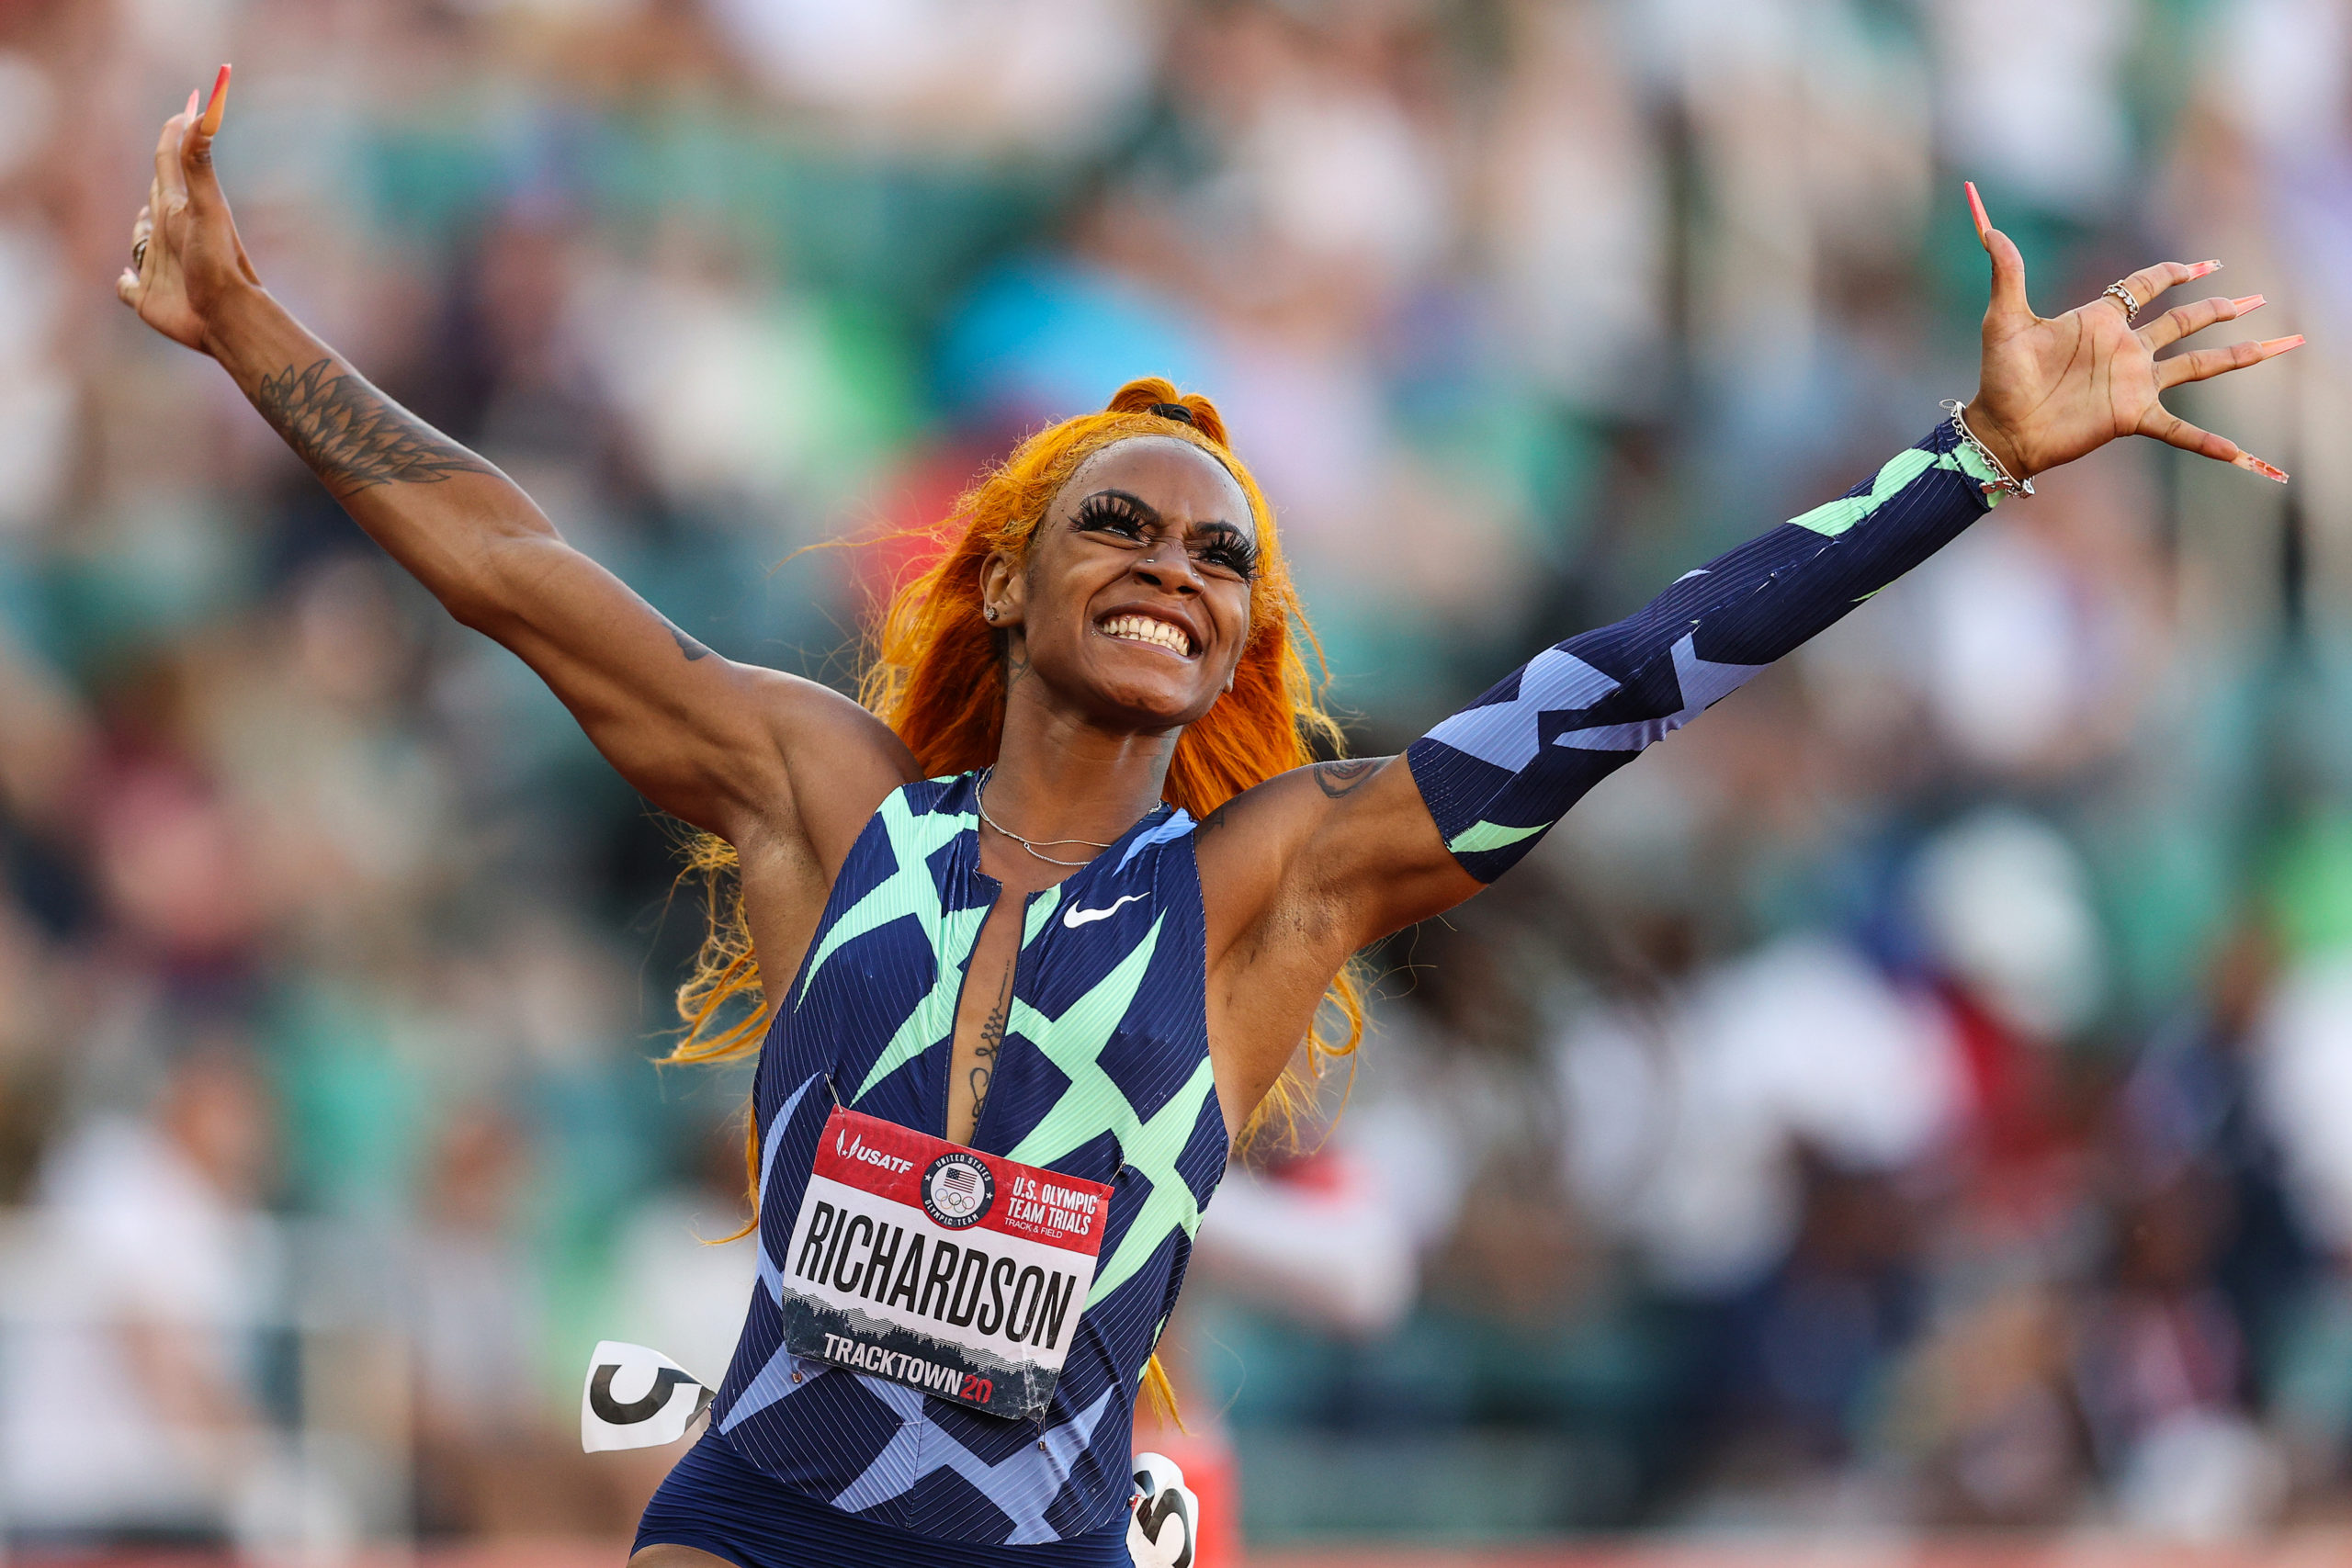 1. Olympic Track Star with Blue Hair Breaks World Record - wide 2